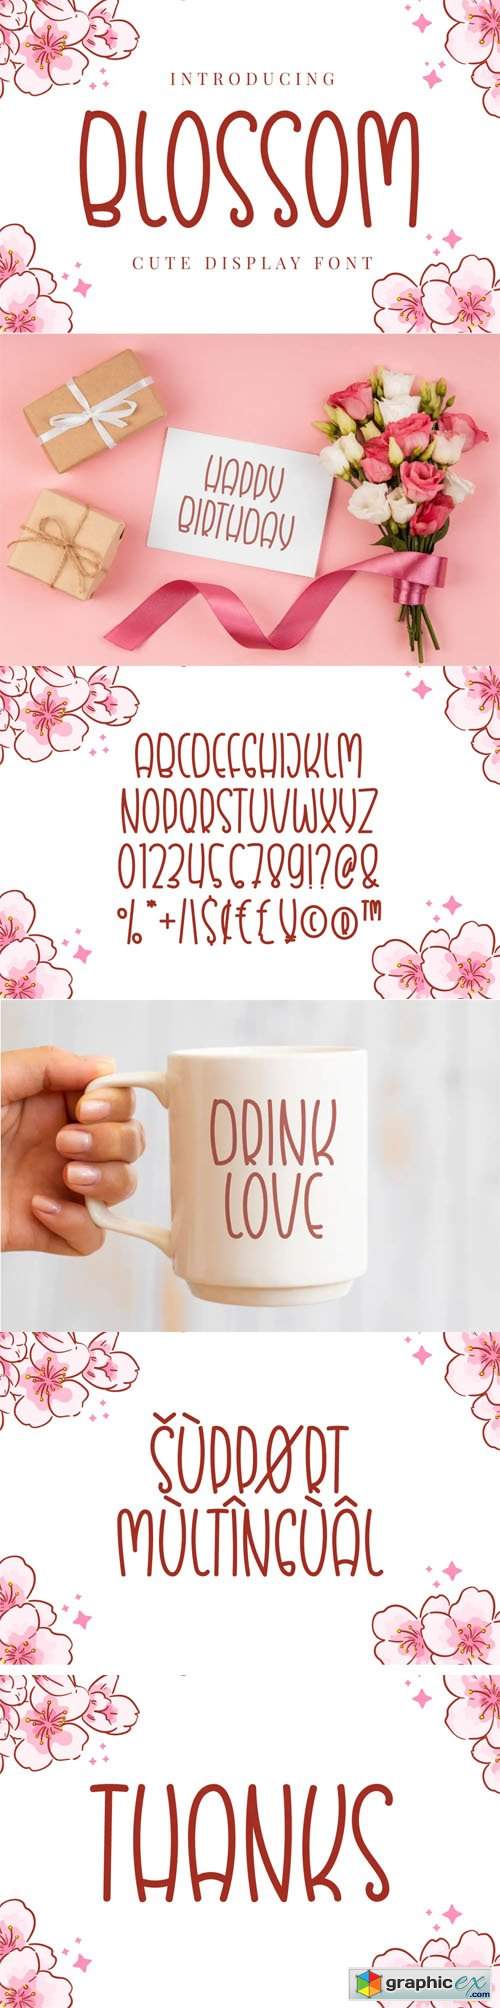  Blossom - Quirky & Cute Display Font 